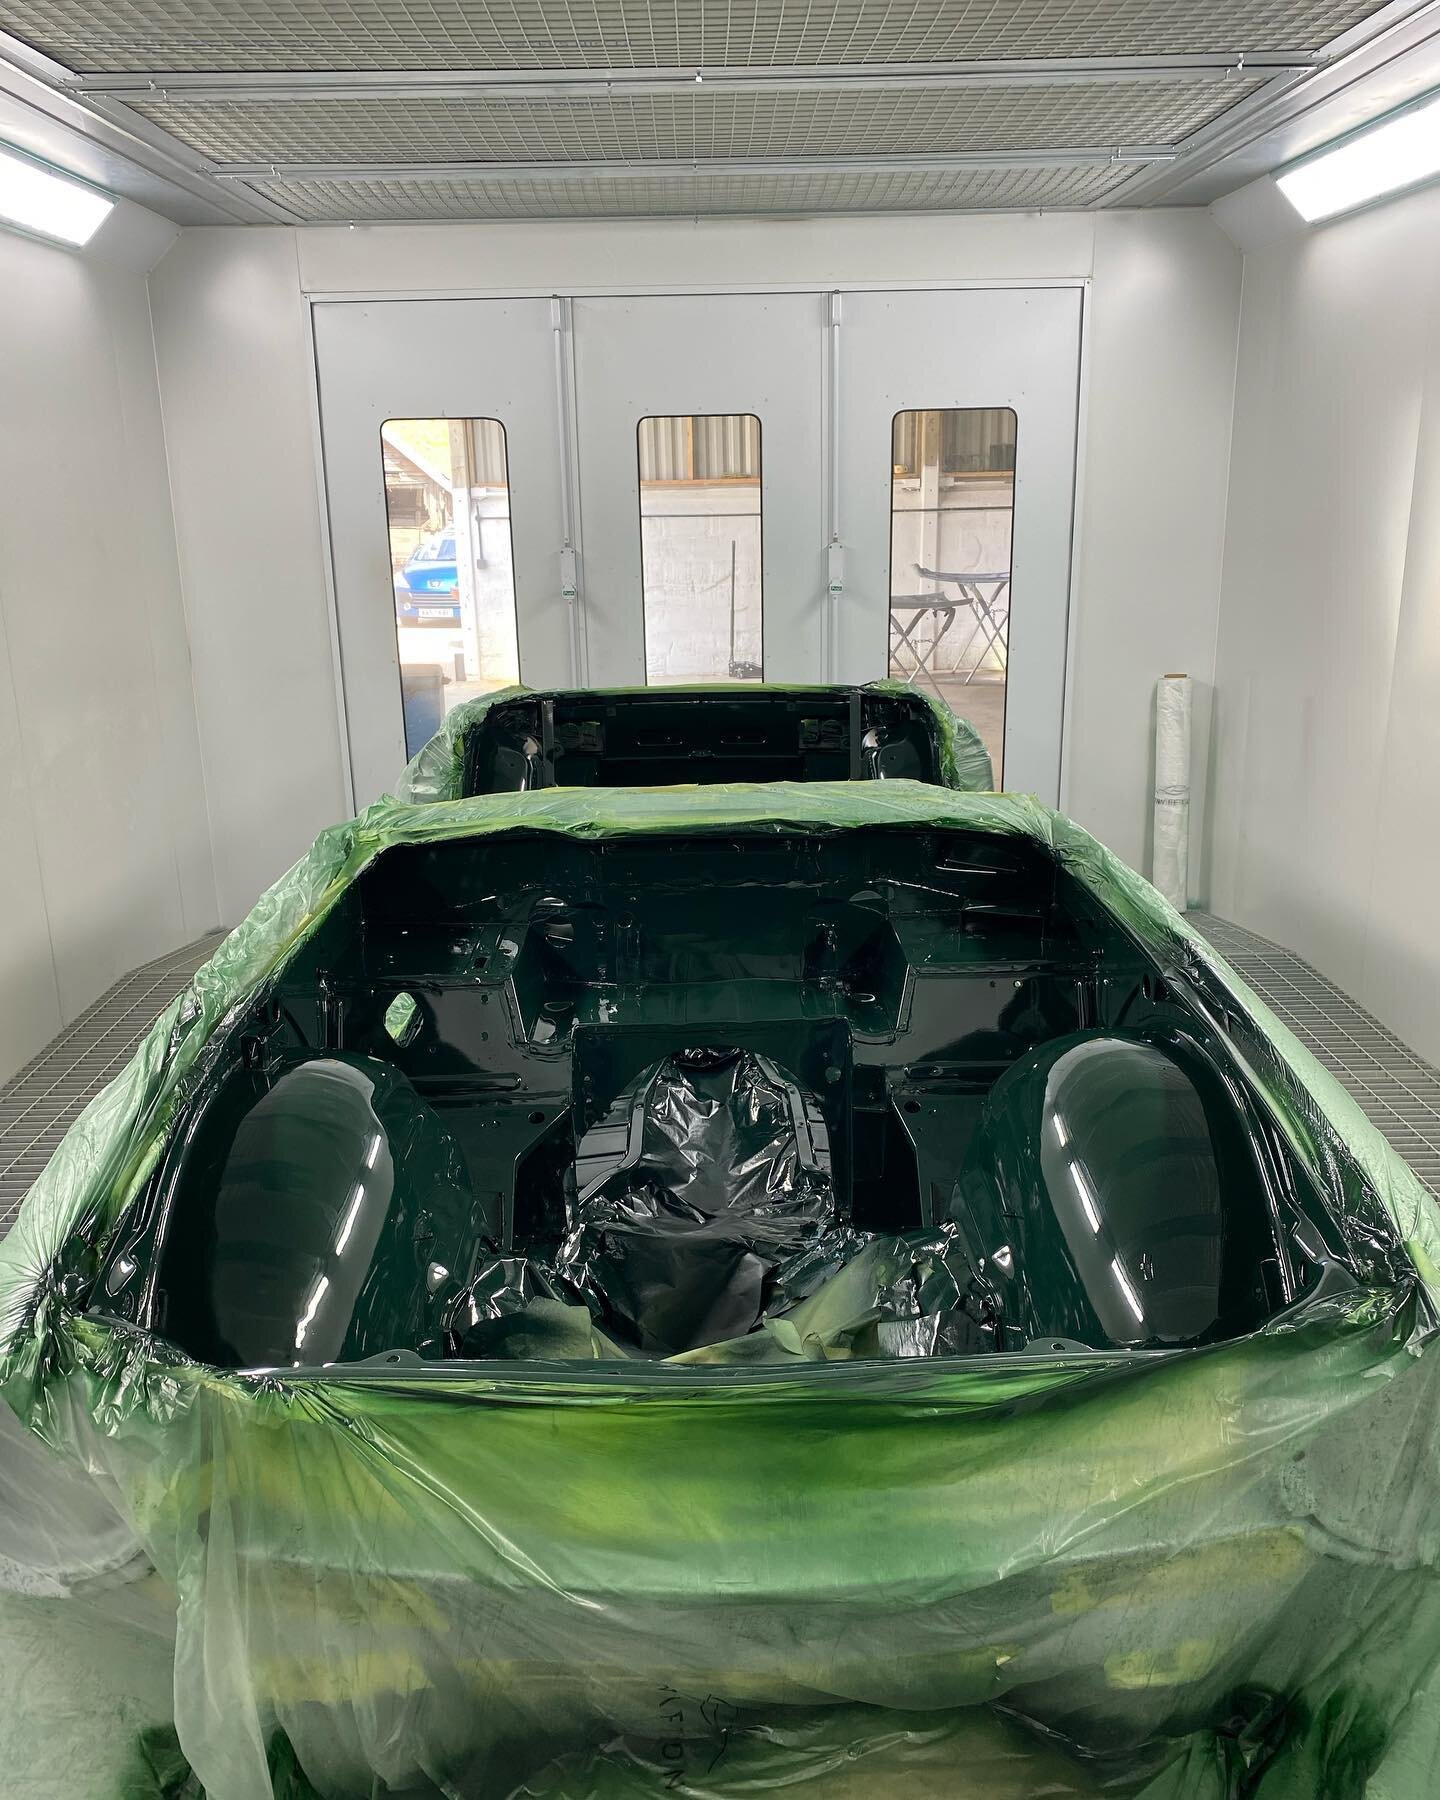 Interior and engine bays of this Triumph TR6 have now been sprayed in this gorgeous Jaguar British Racing Green. 

Extremely suitable and period correct colour for this Triumph, very traditional. 

When in doubt paint it British Racing Green. 

#brit